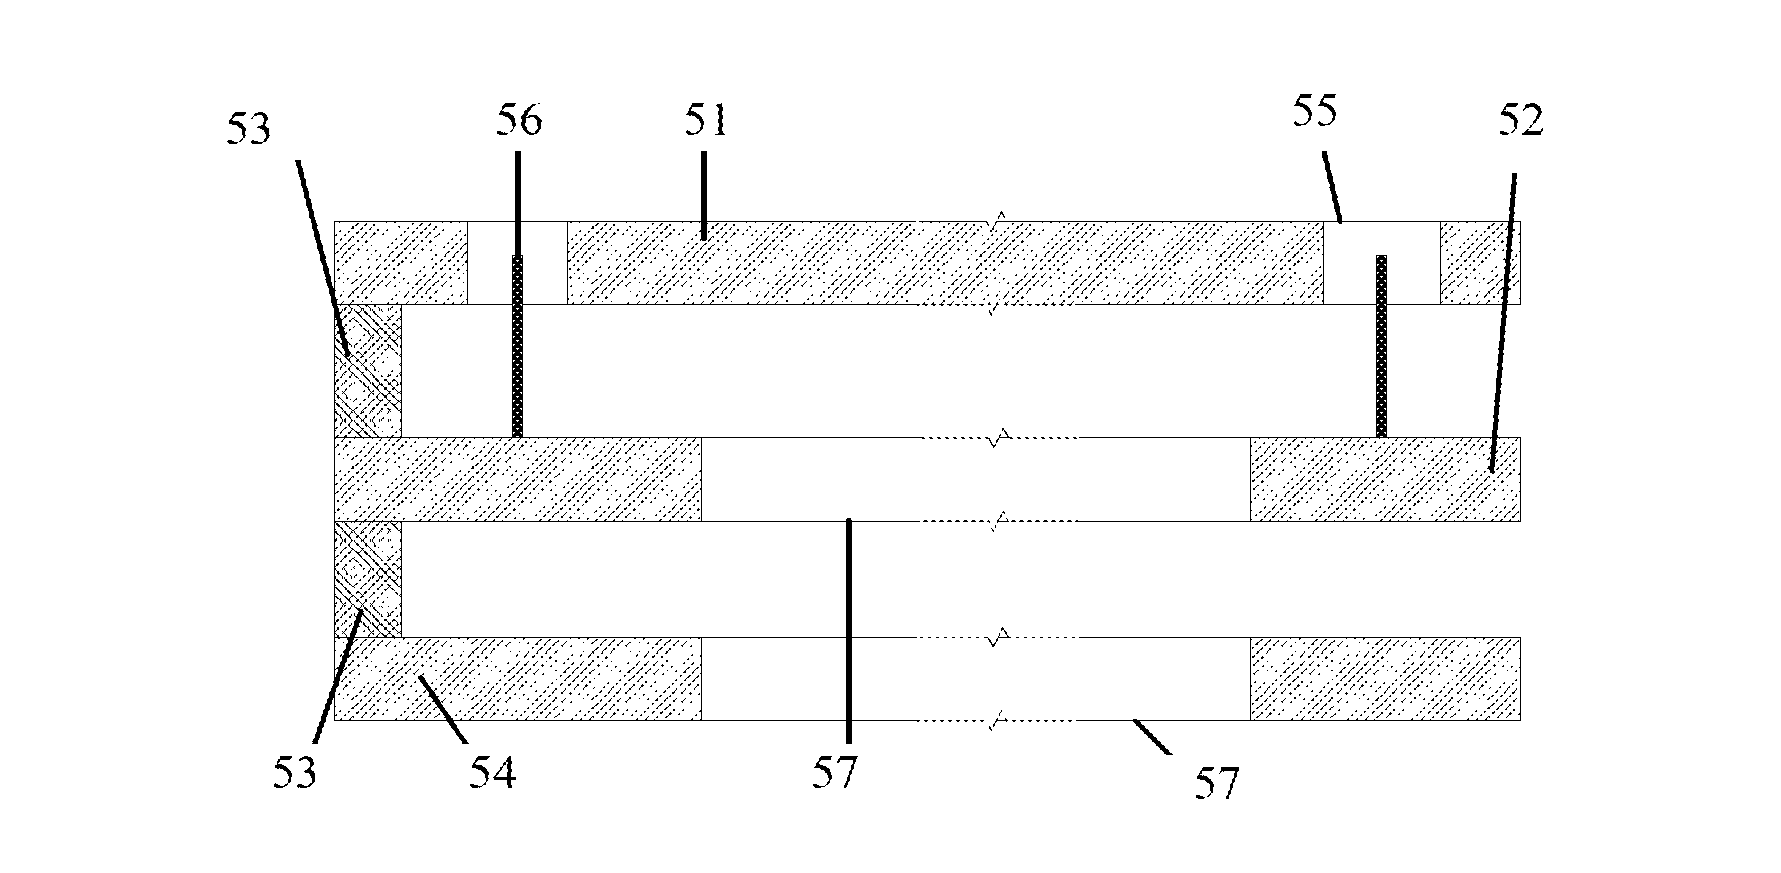 Electronically-controlled device for release of drugs, proteins, and other organic or inorganic chemicals